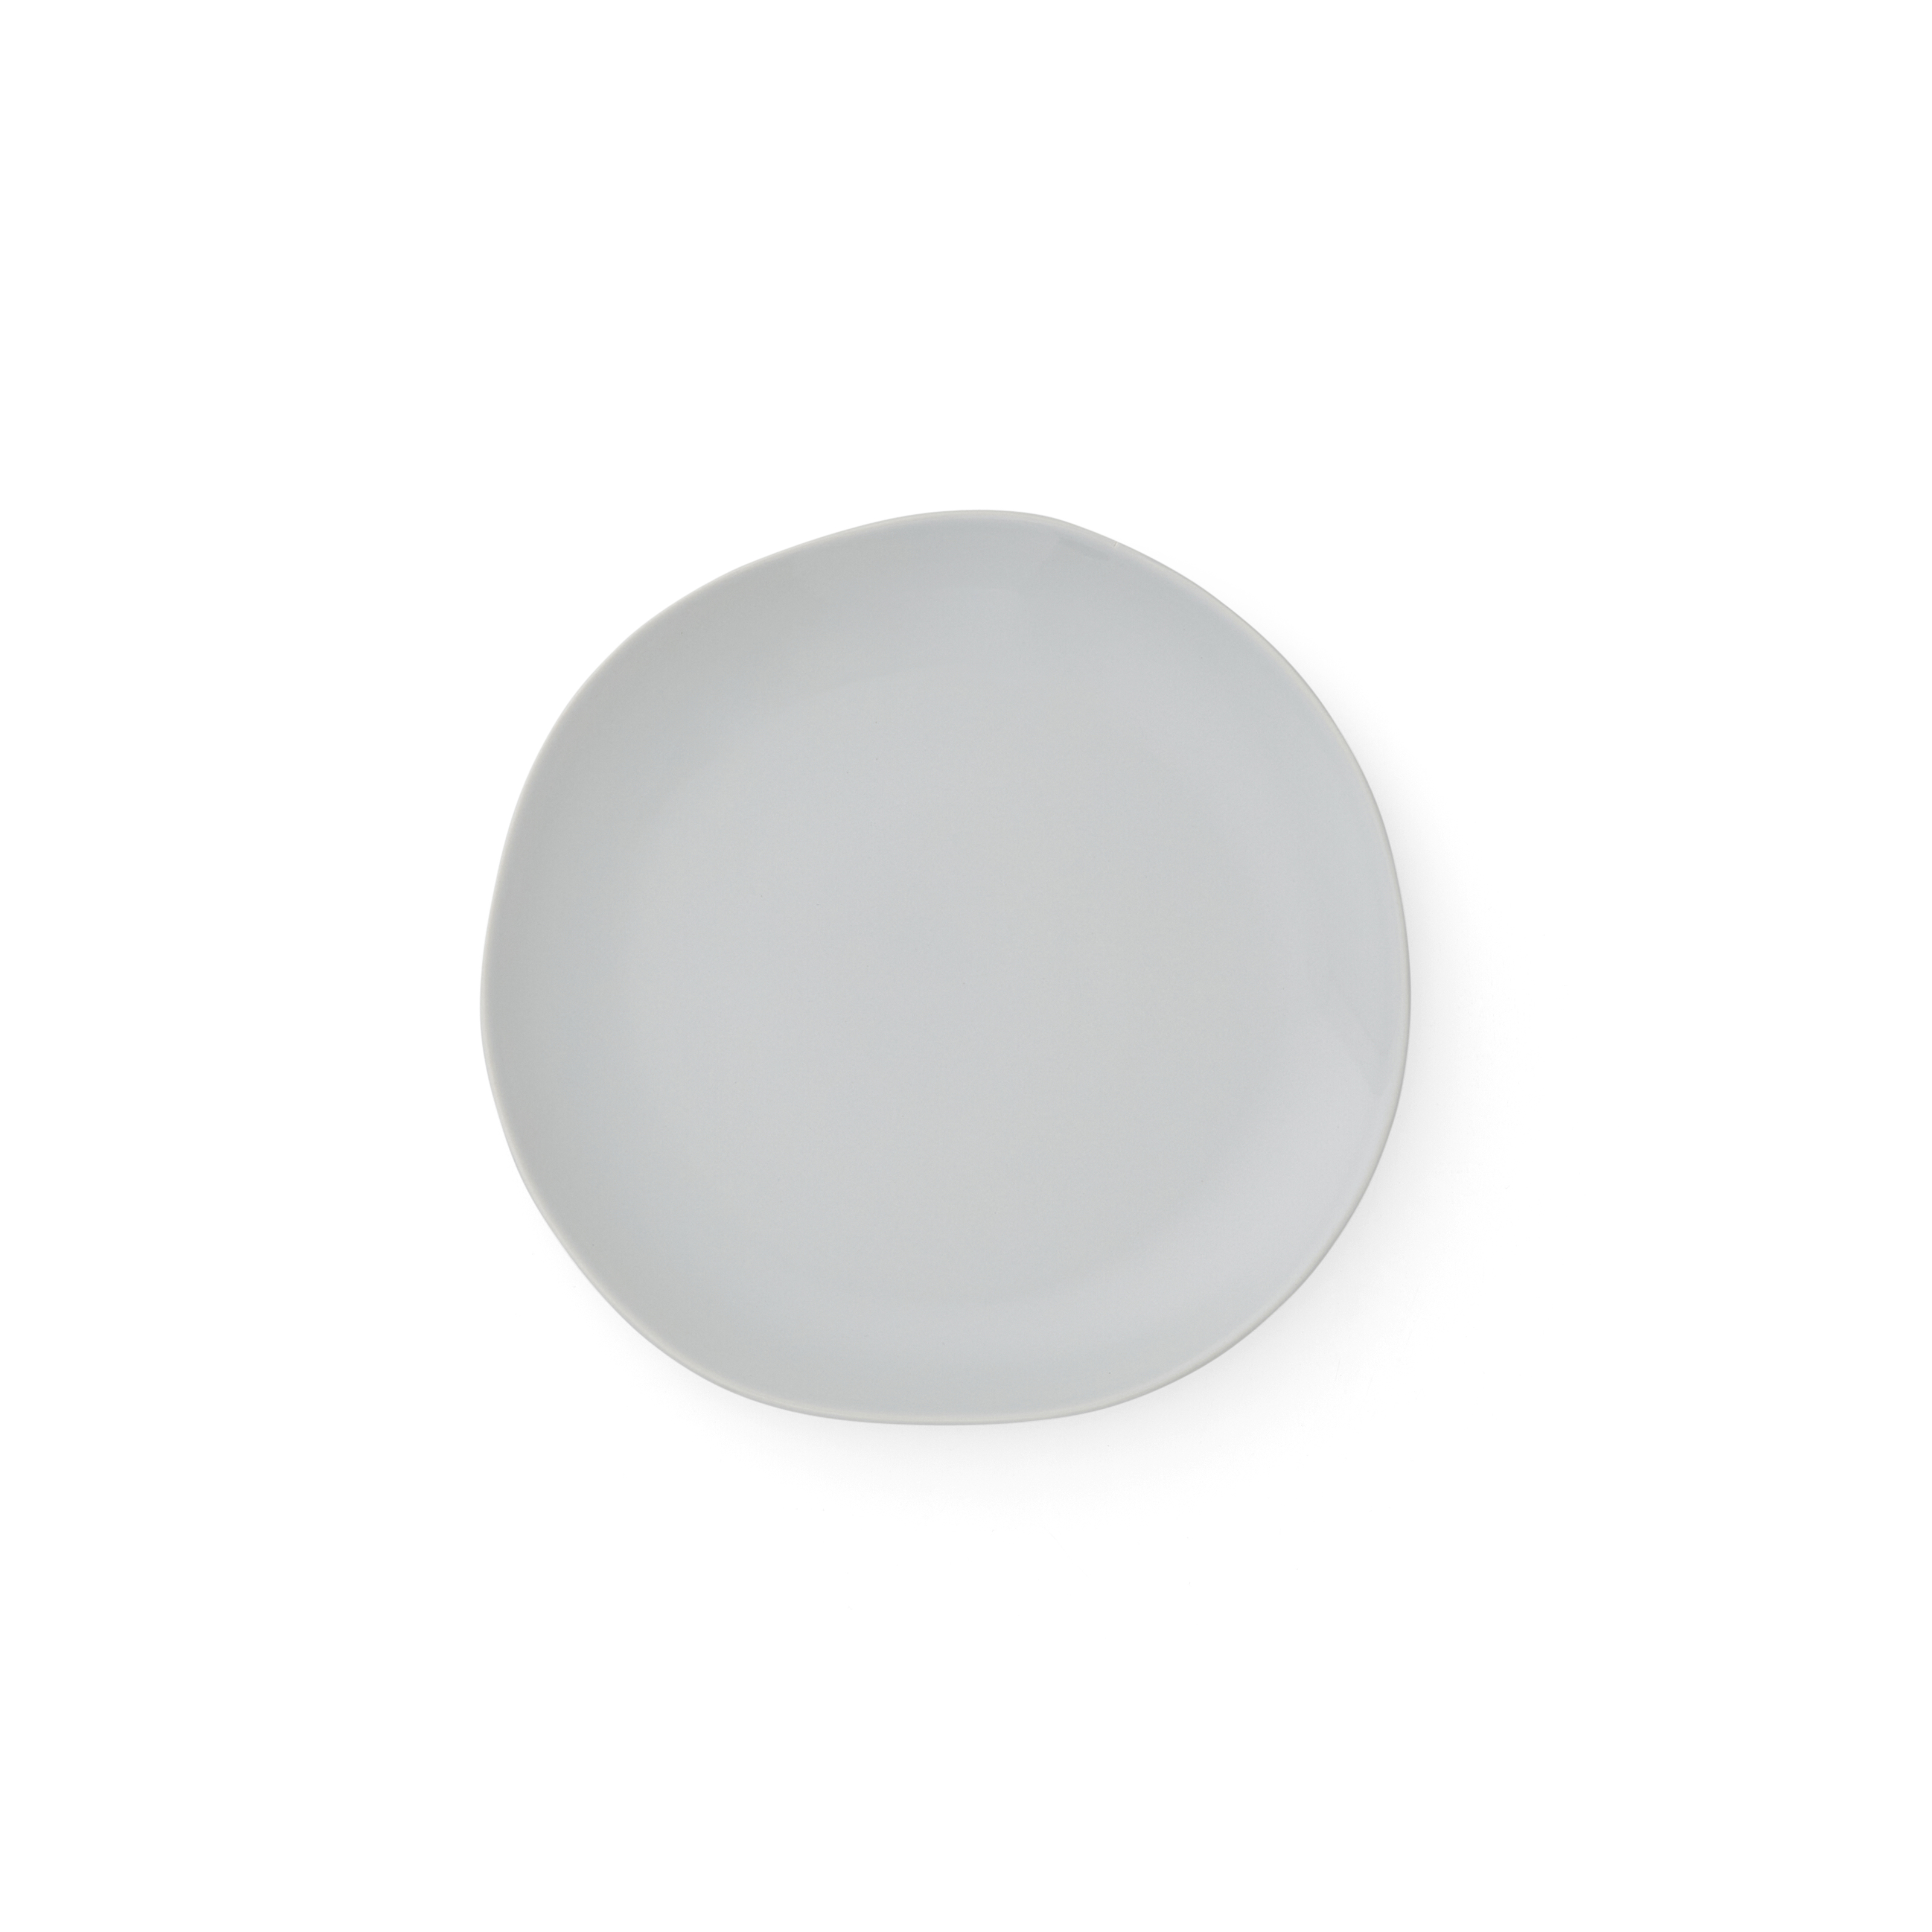 Sophie Conran Arbor 8.5" Salad Plate- Dove Grey image number null